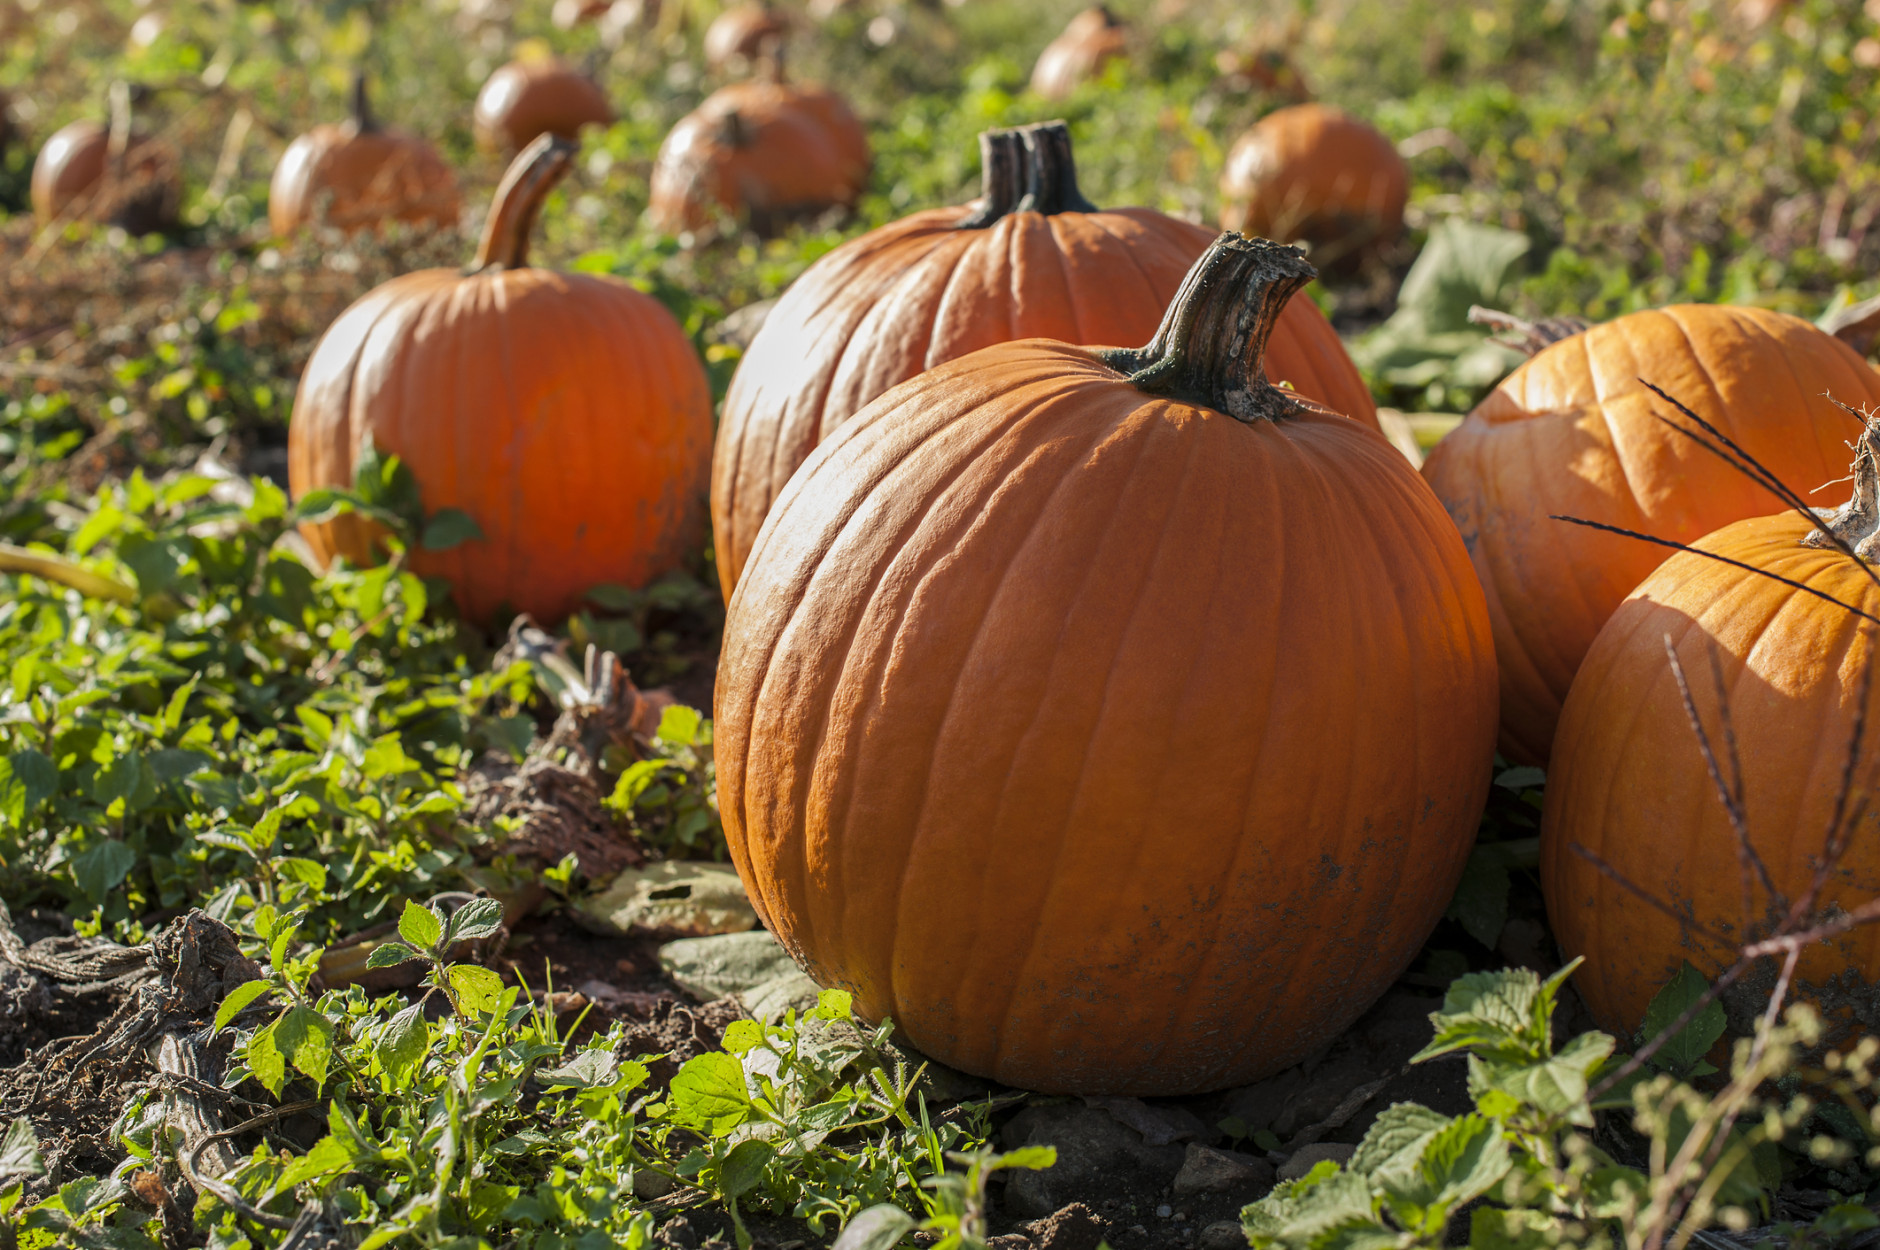 Leave pumpkins alone until they’re fully colored up. (Getty Images/iStockphoto/AllenSphoto)